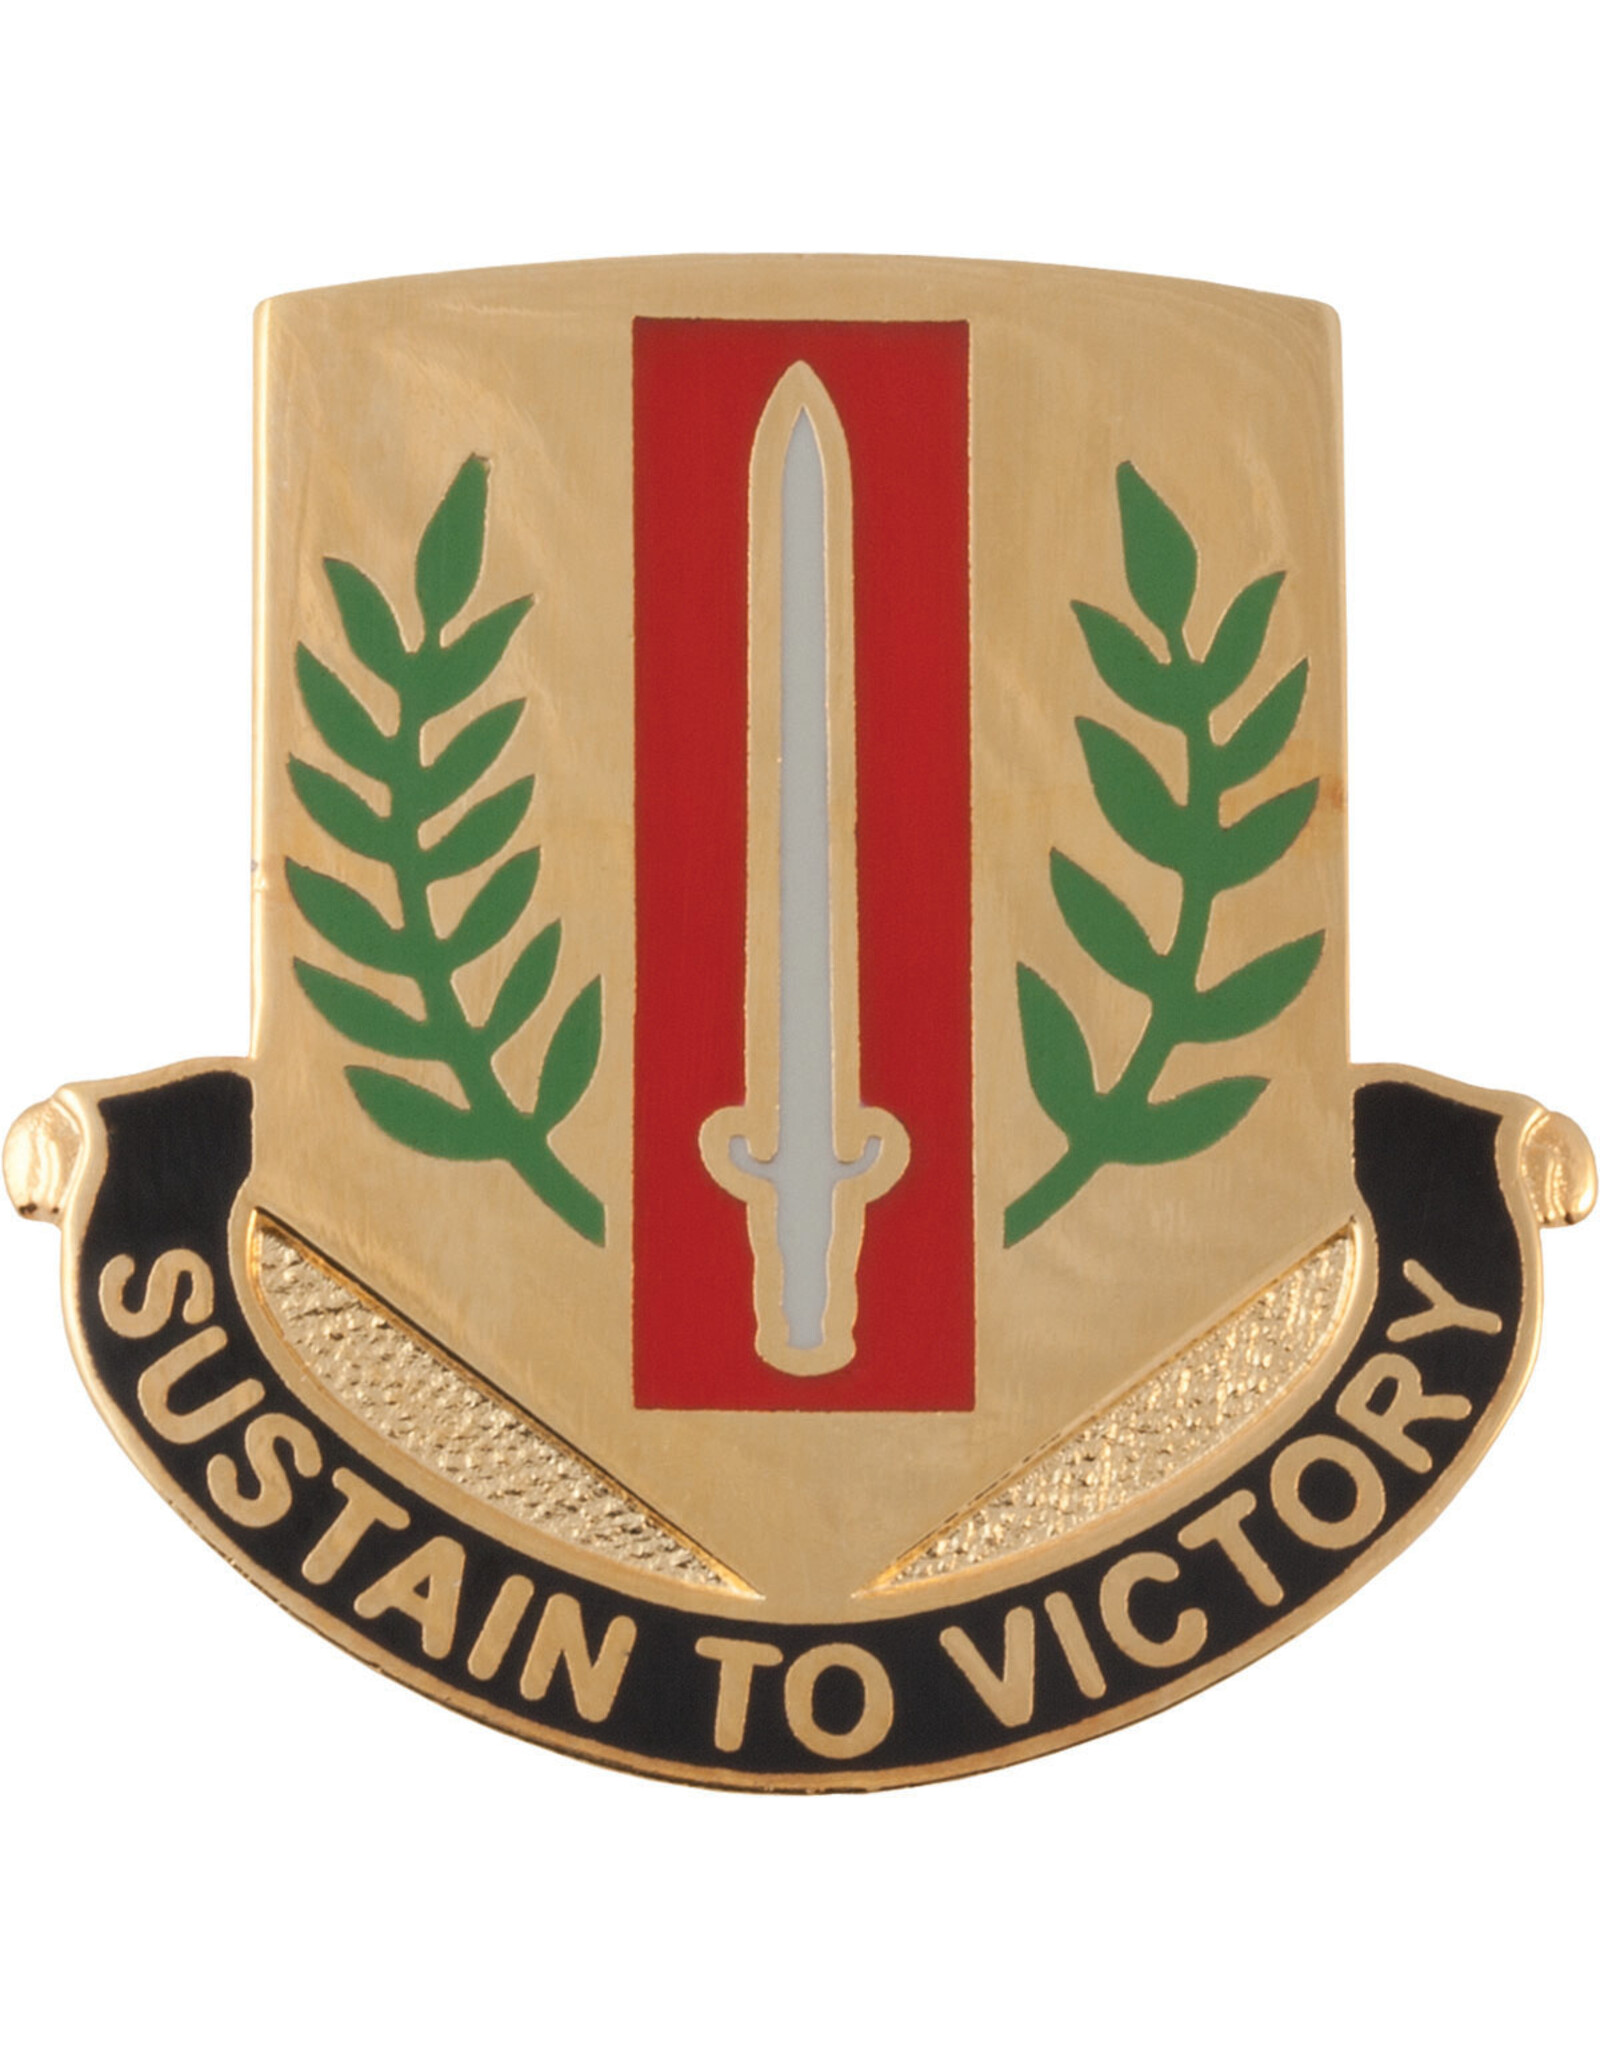 1st Sustainment Crest, Sustain to Victory